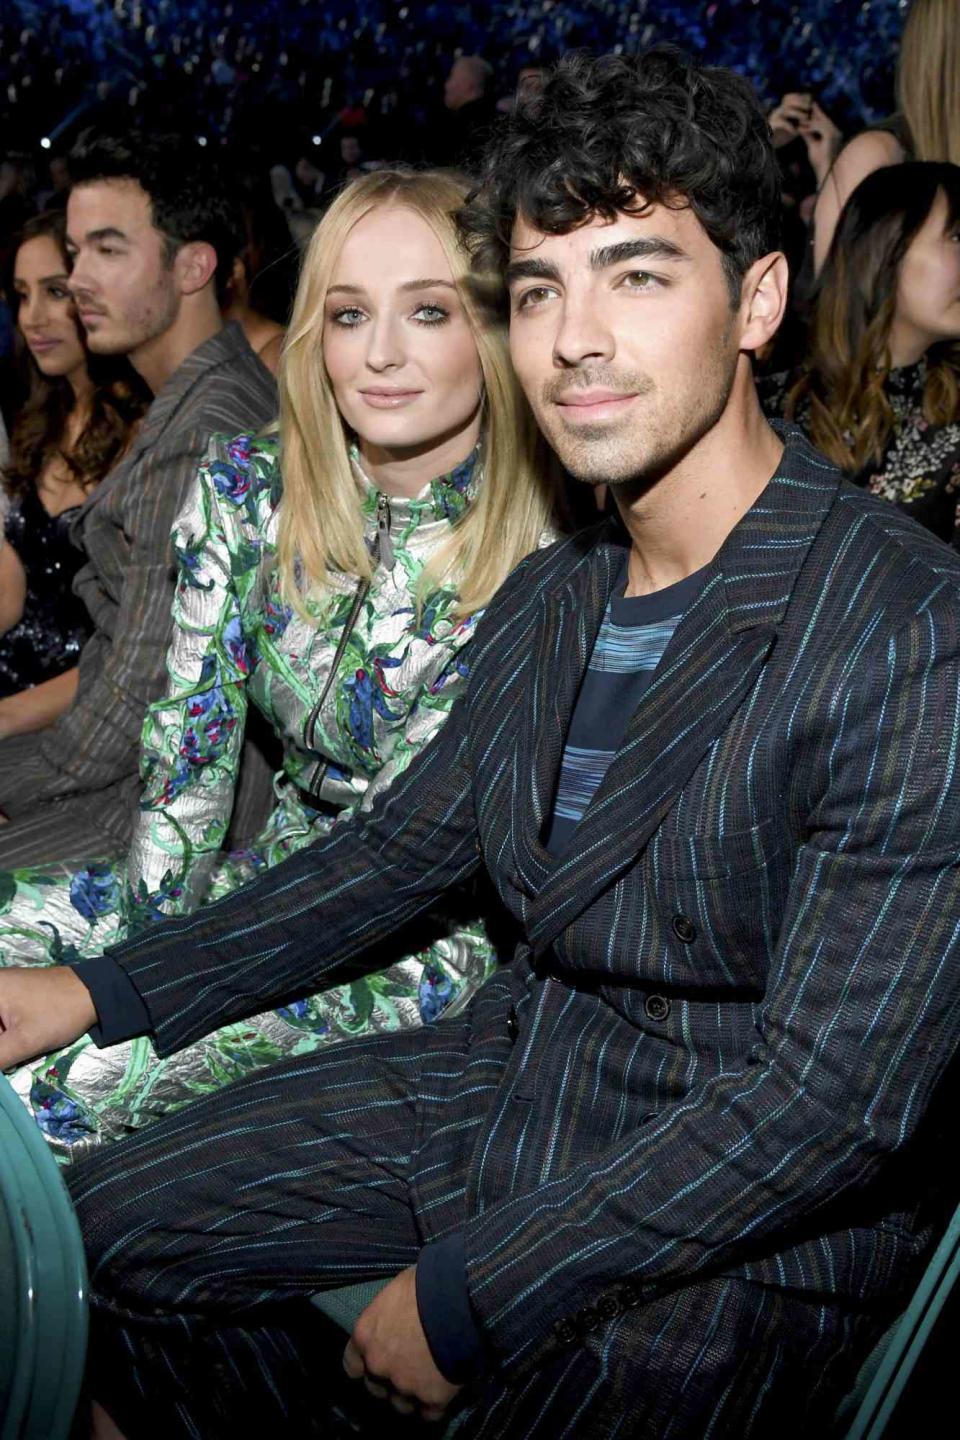 LAS VEGAS, NV - MAY 01: (L-R) Sophie Turner and Joe Jonas attend the 2019 Billboard Music Awards at MGM Grand Garden Arena on May 1, 2019 in Las Vegas, Nevada. (Photo by Kevin Mazur/Getty Images for dcp)